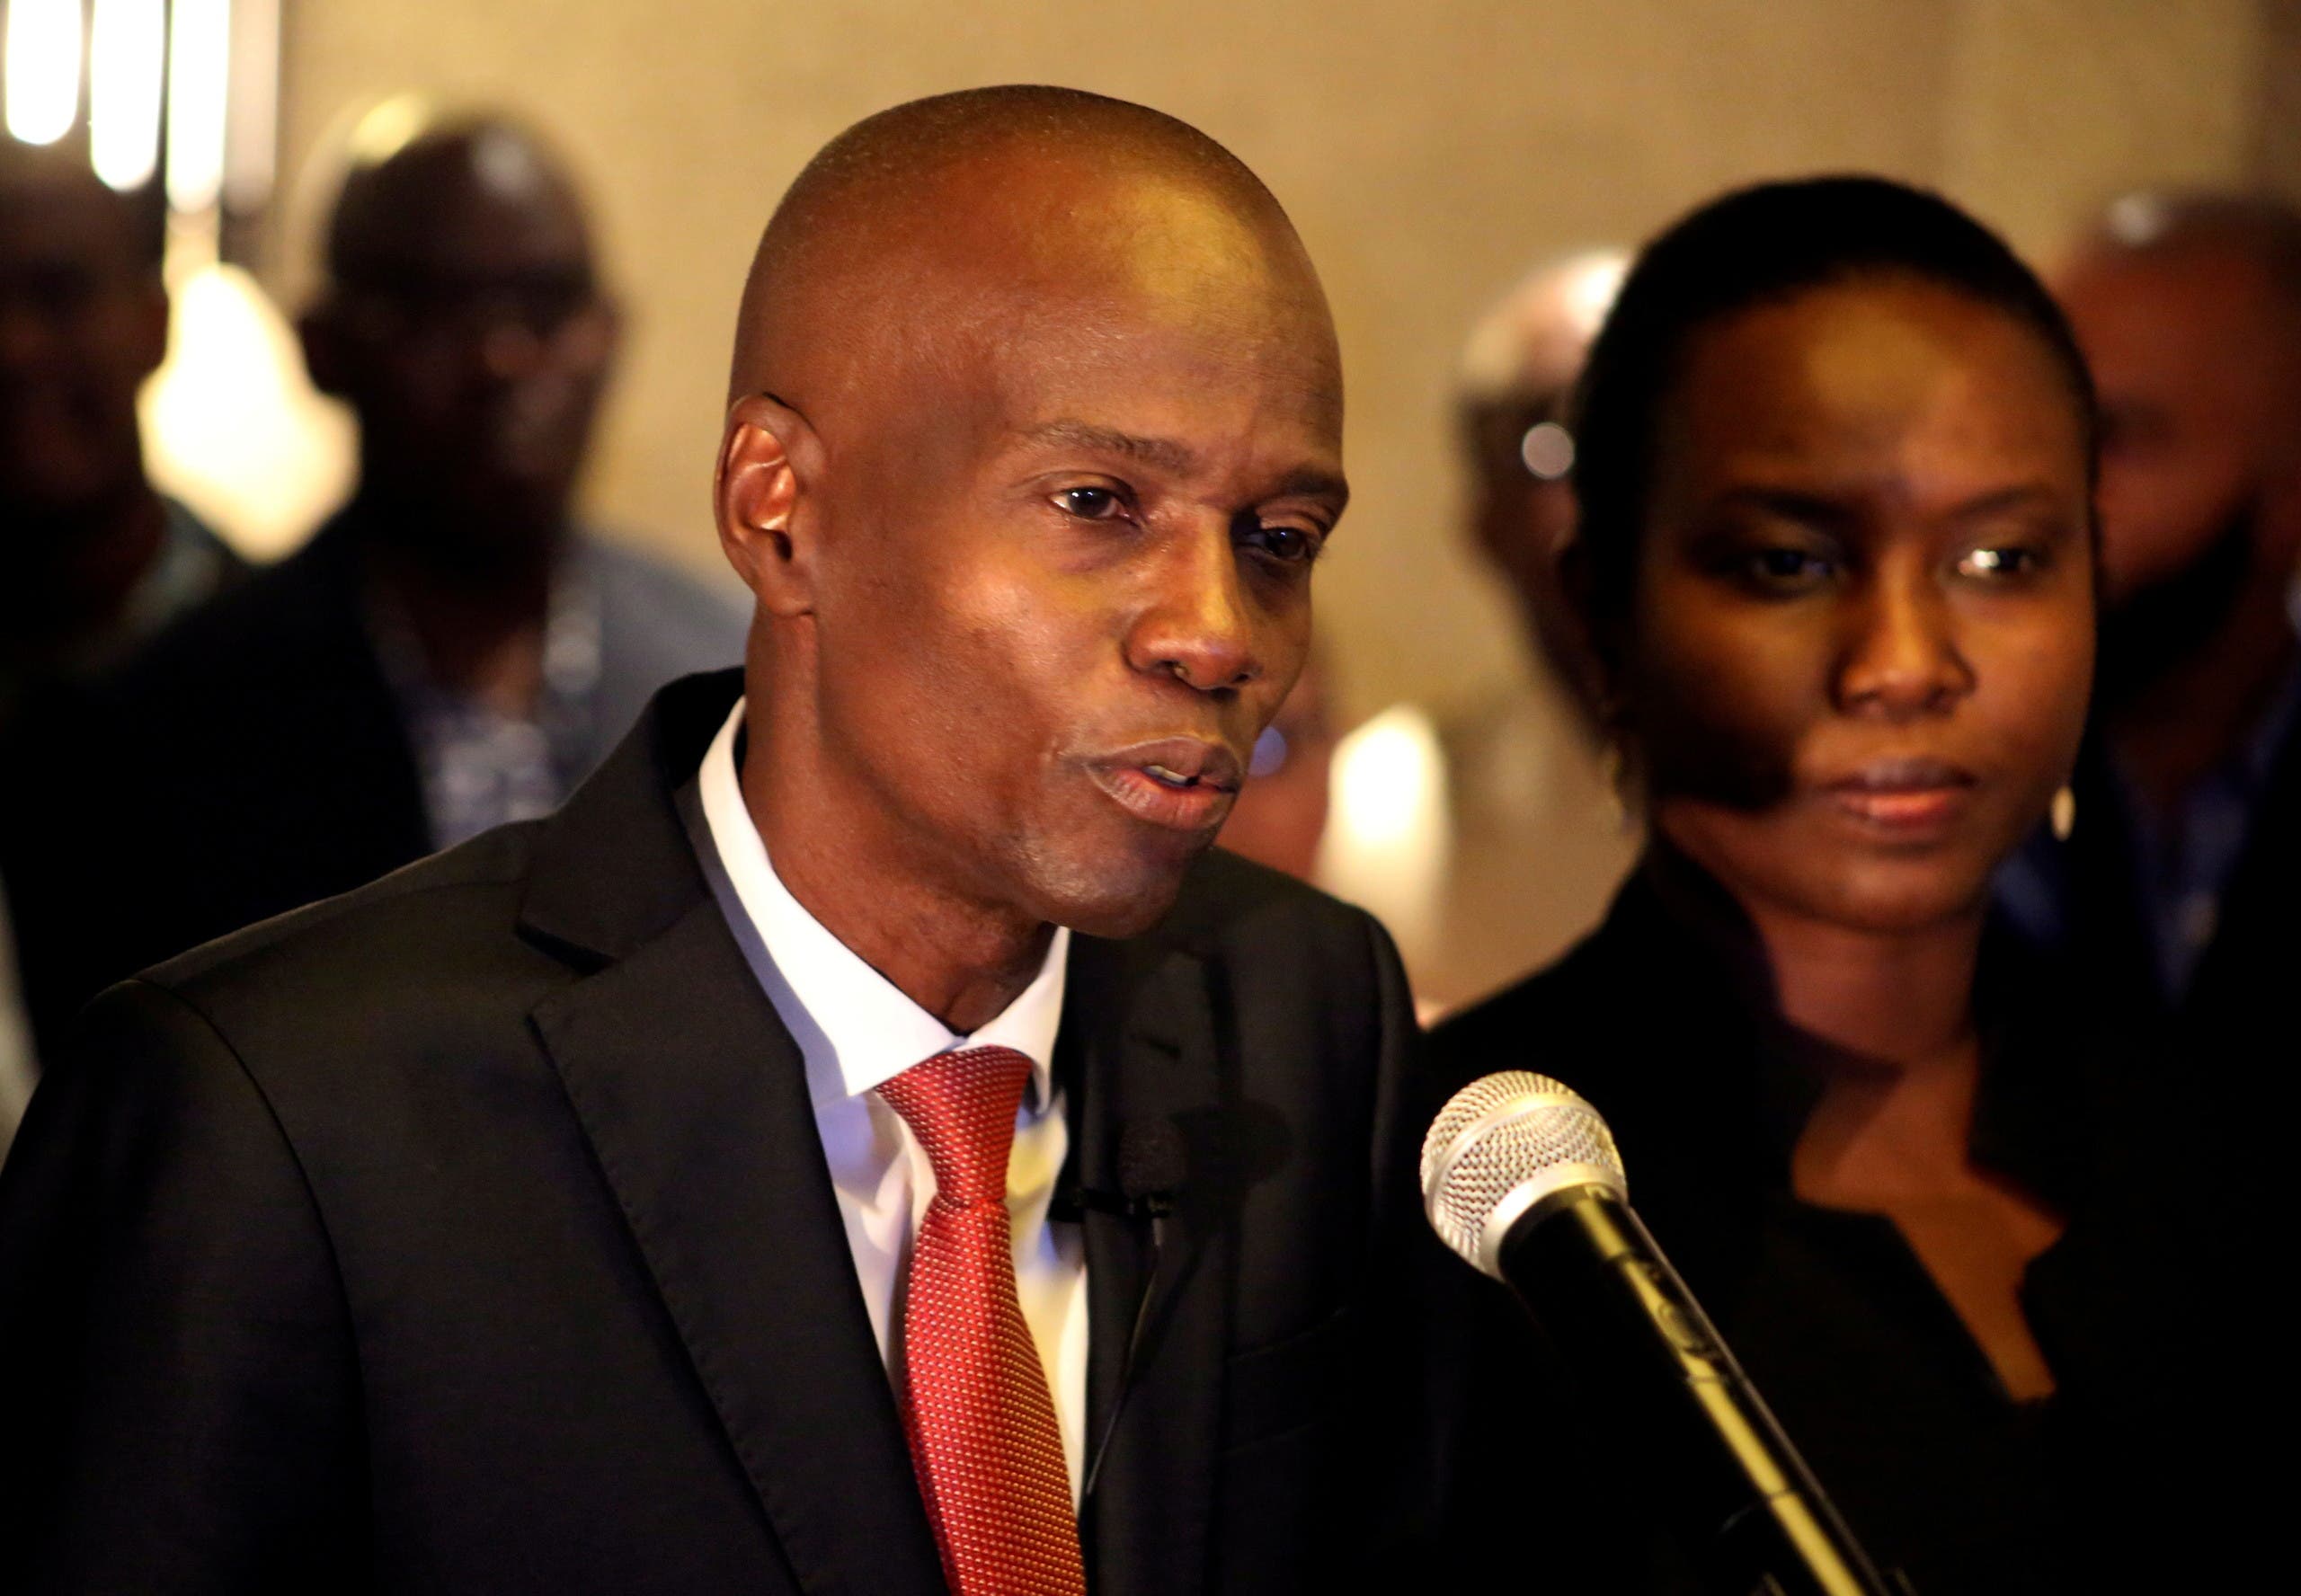 File photo Jovenel Moise addressing the media next to his wife Martine after winning the 2016 presidential election, in Port-au-Prince, Haiti. (Reuters)